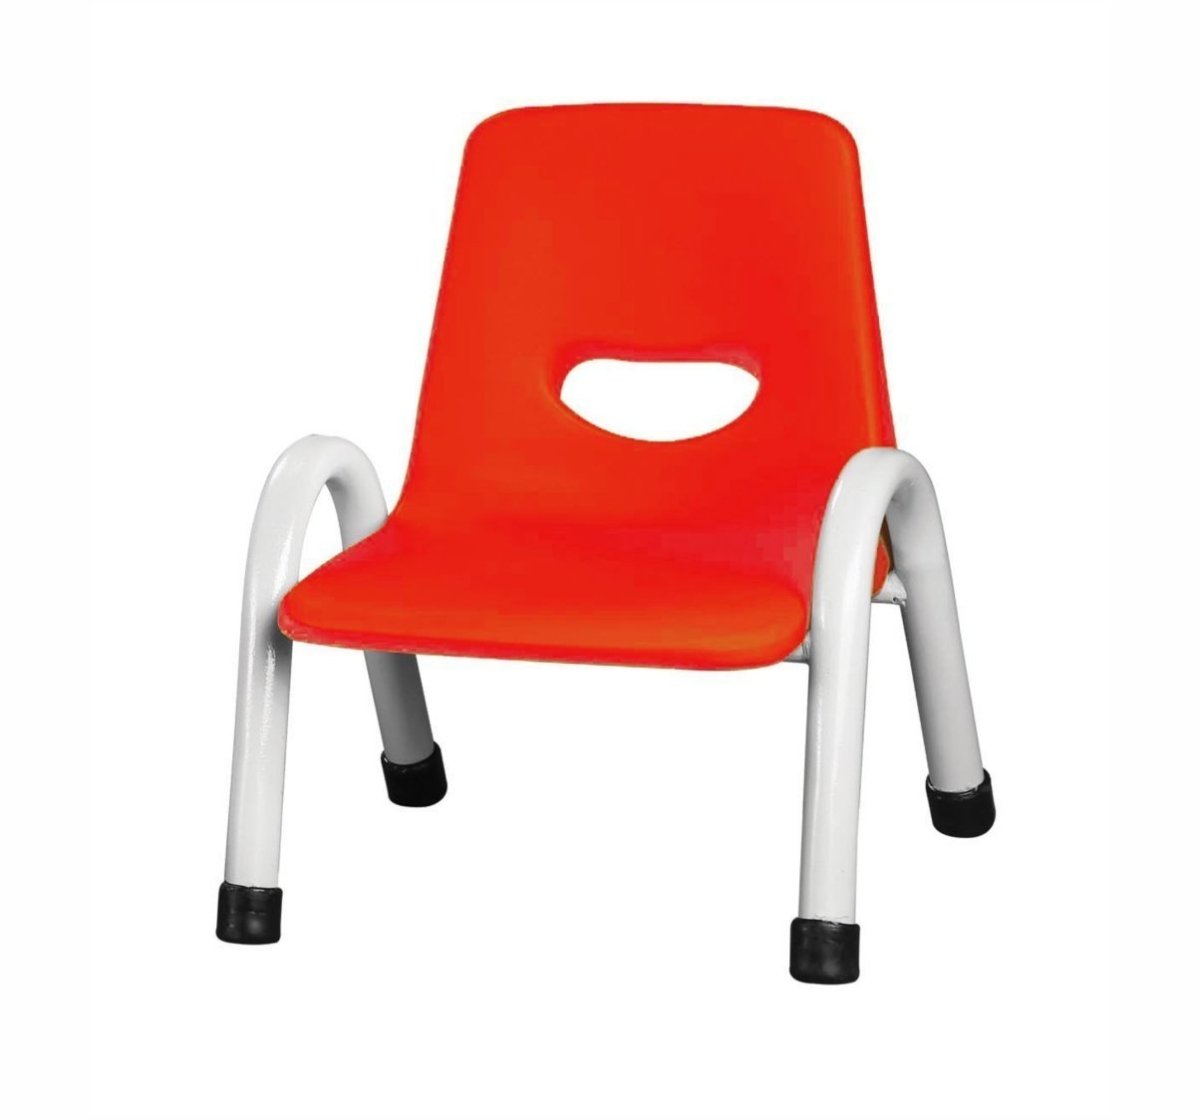 OK Play Cute Chair - Red & Ivory white - FTFF000320